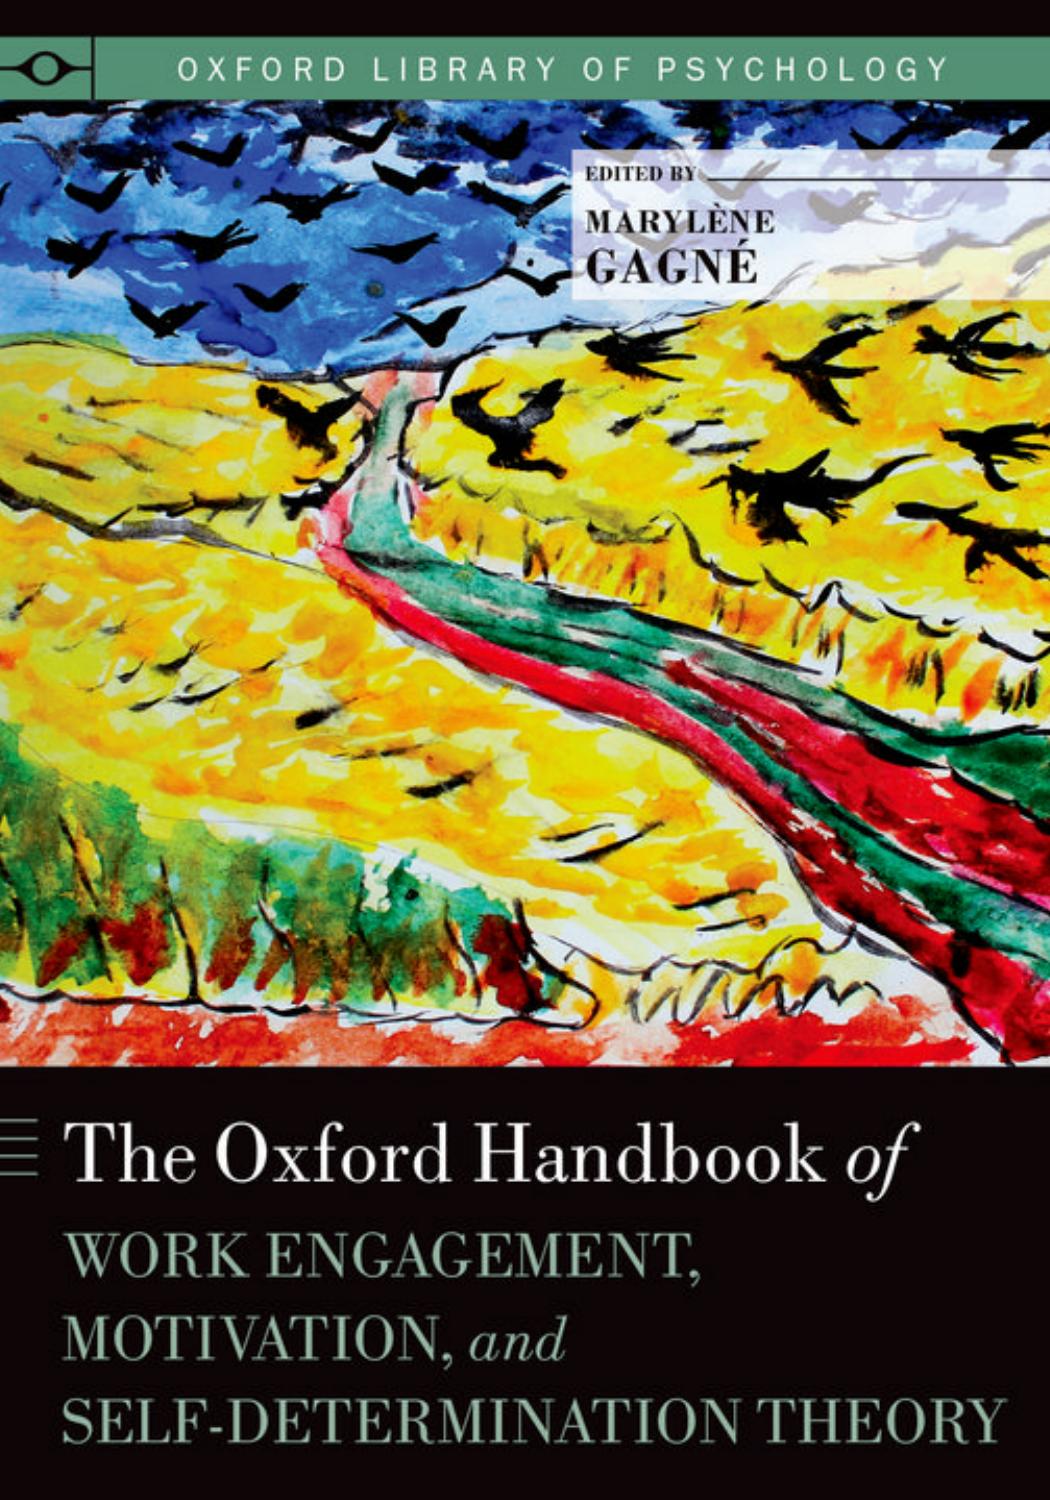 The Oxford Handbook of Work Engagement, Motivation, and Self-Determination Theory